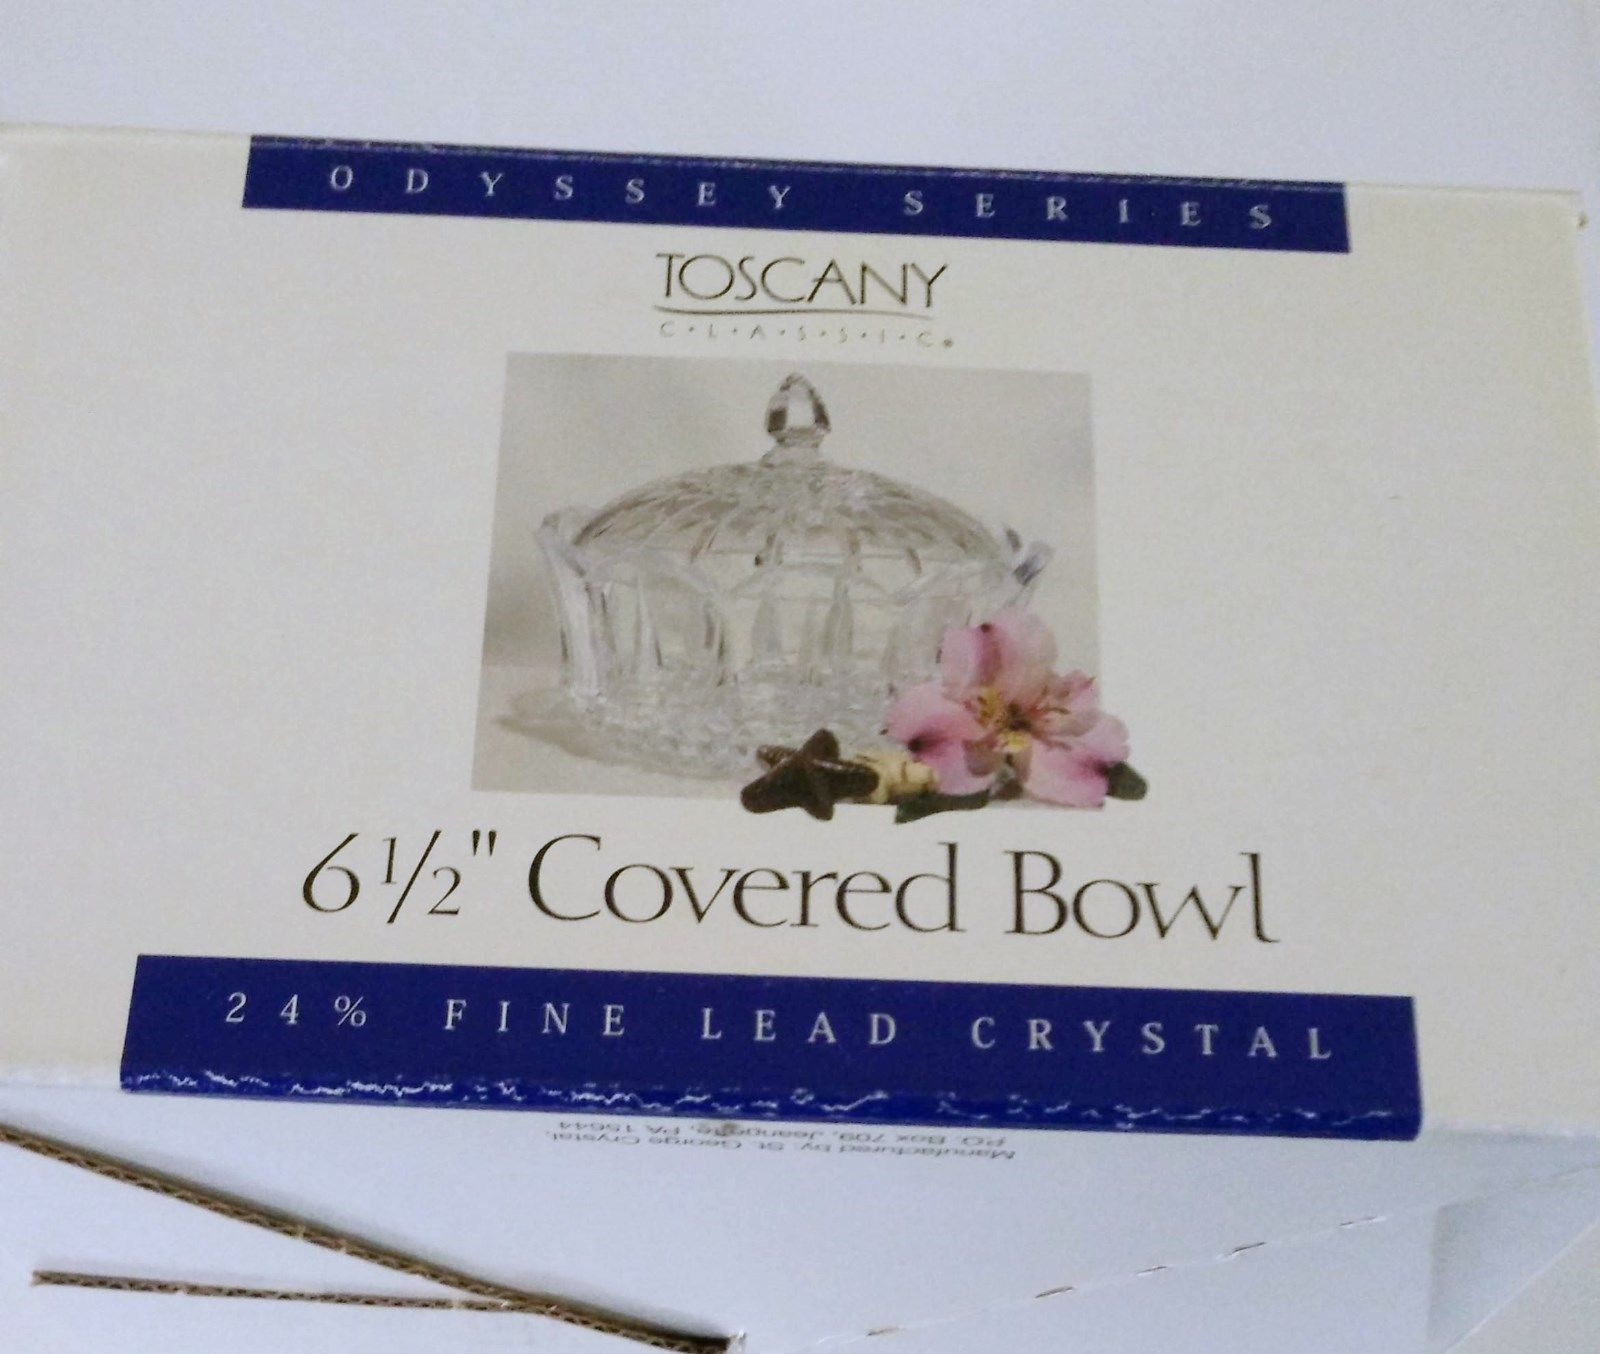 22 Unique Vera Wang Crystal Vase 2024 free download vera wang crystal vase of toscany classic odyssey series 6 1 2 covered bowl 24 fine lead intended for 1 of 11only 1 available